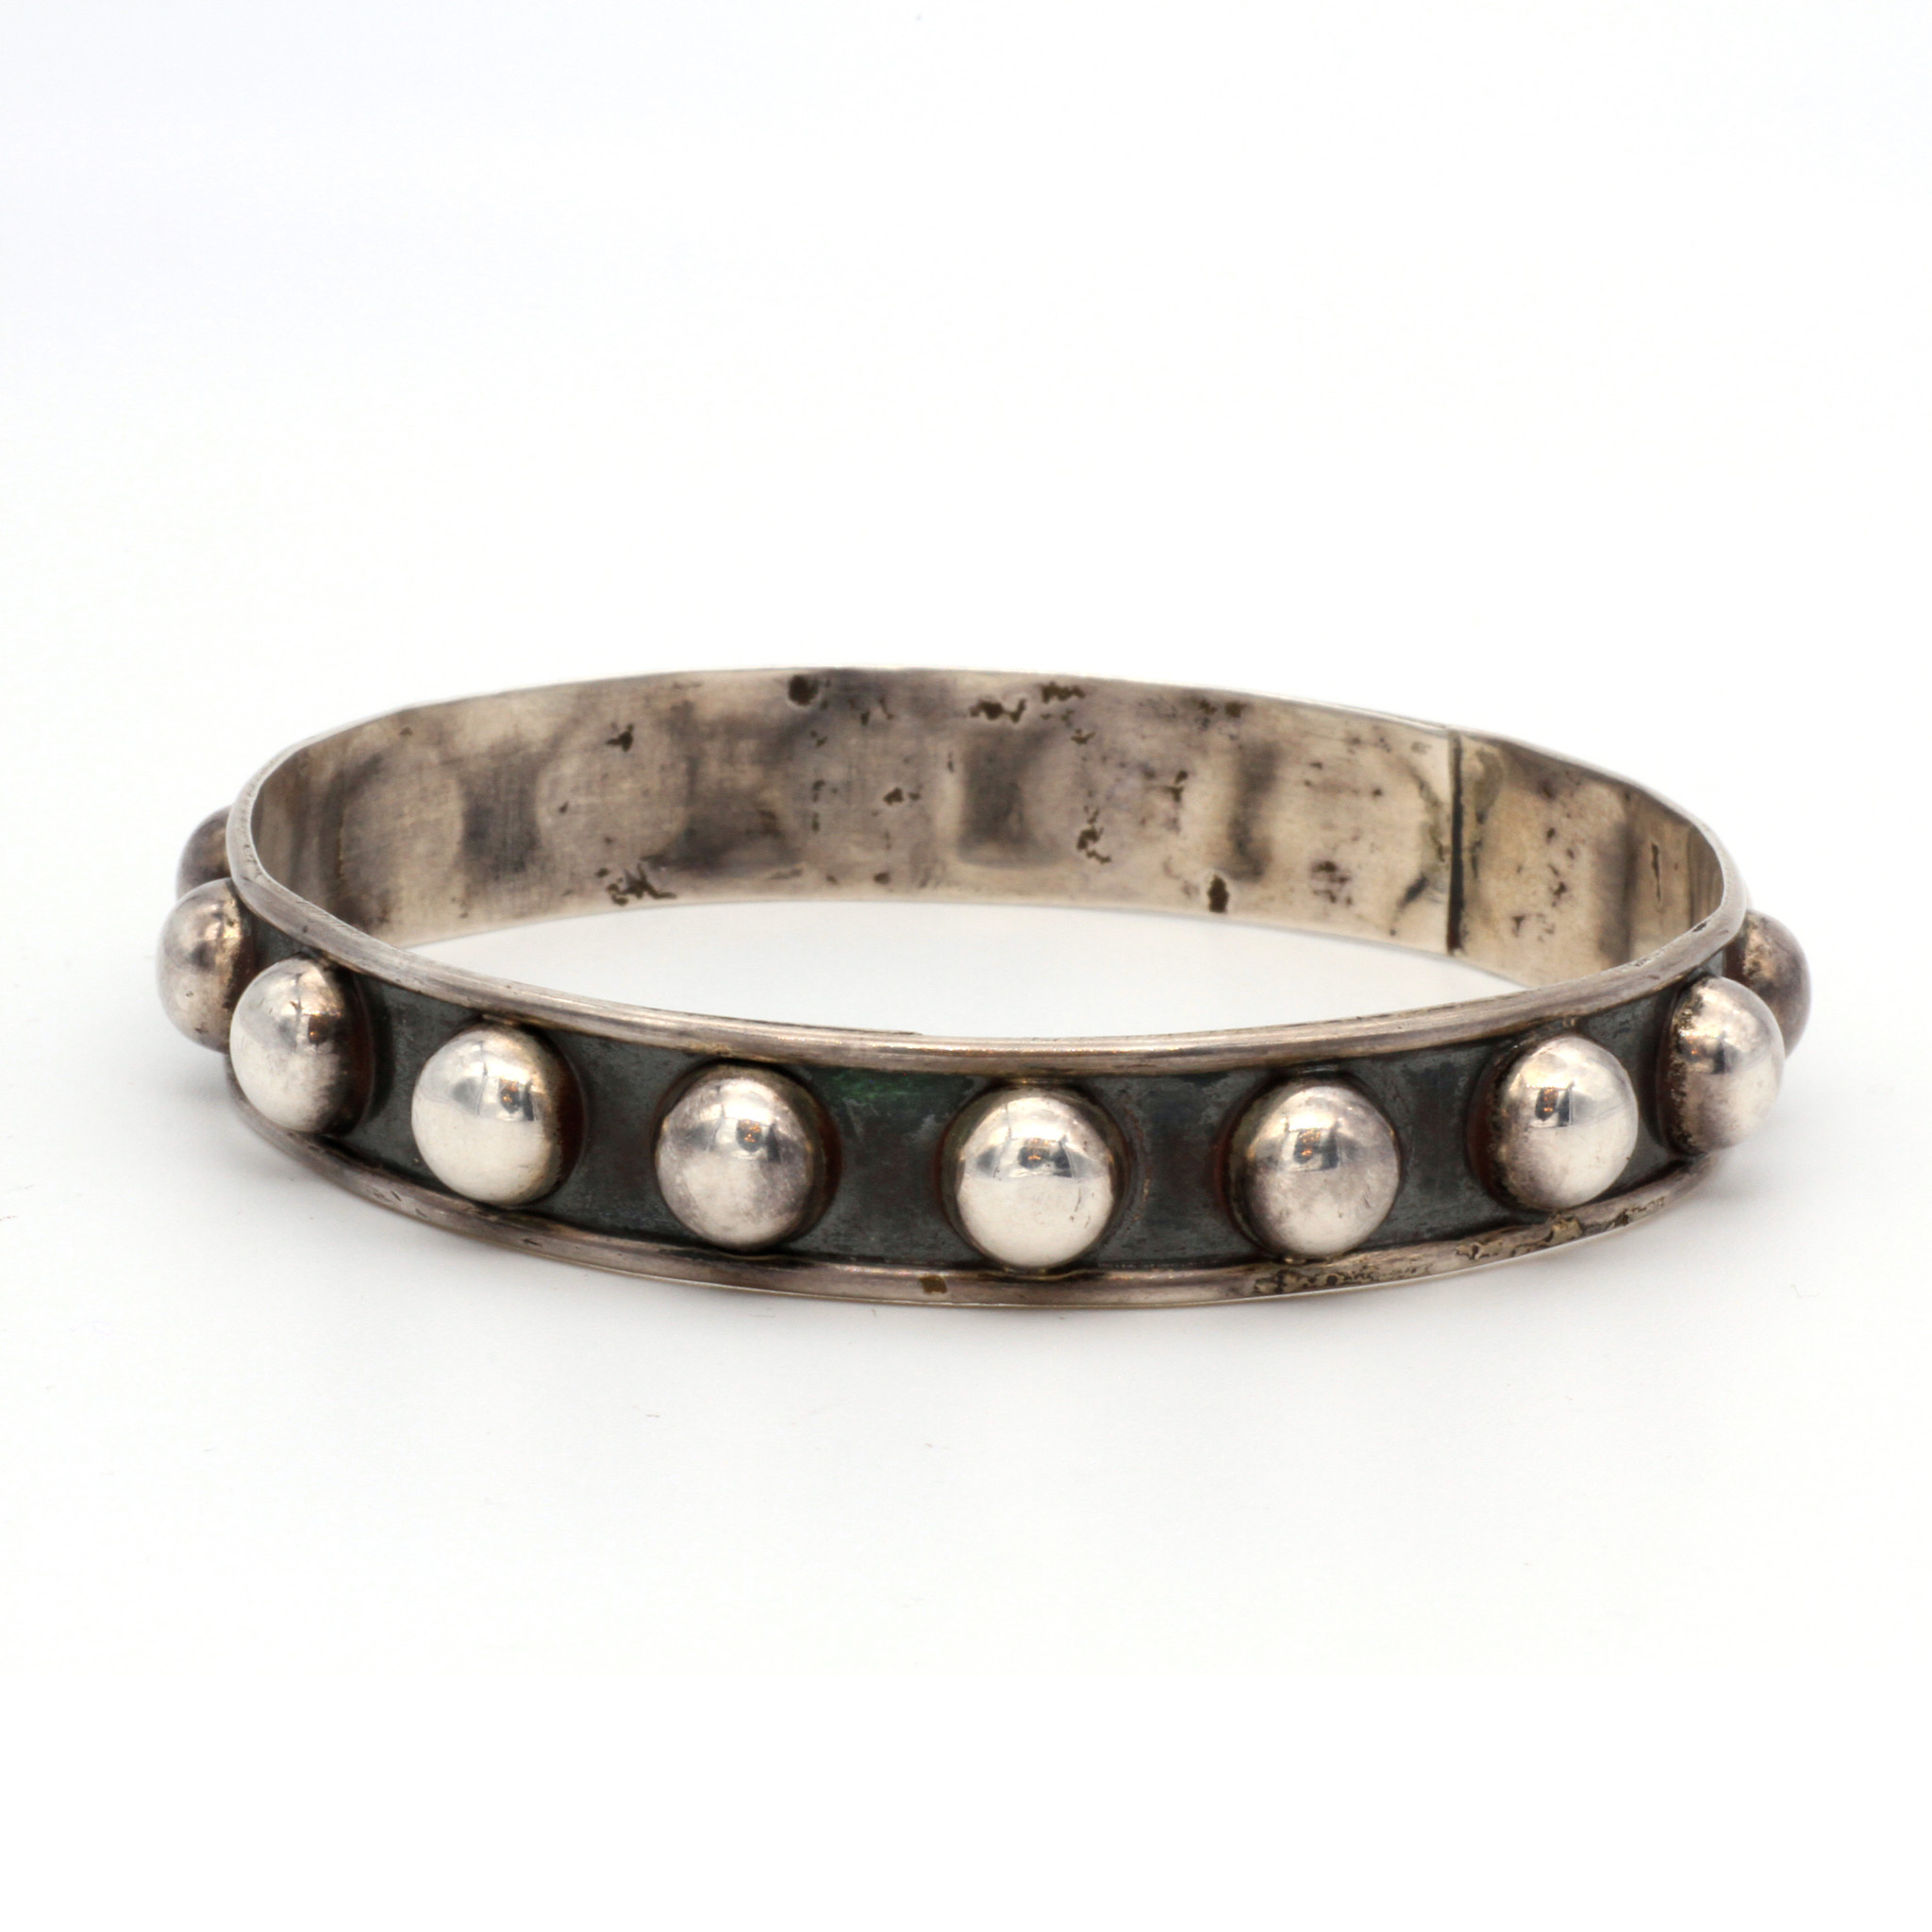 High-Polish Sterling Silver Bangle Bracelet from Mexico - Simple